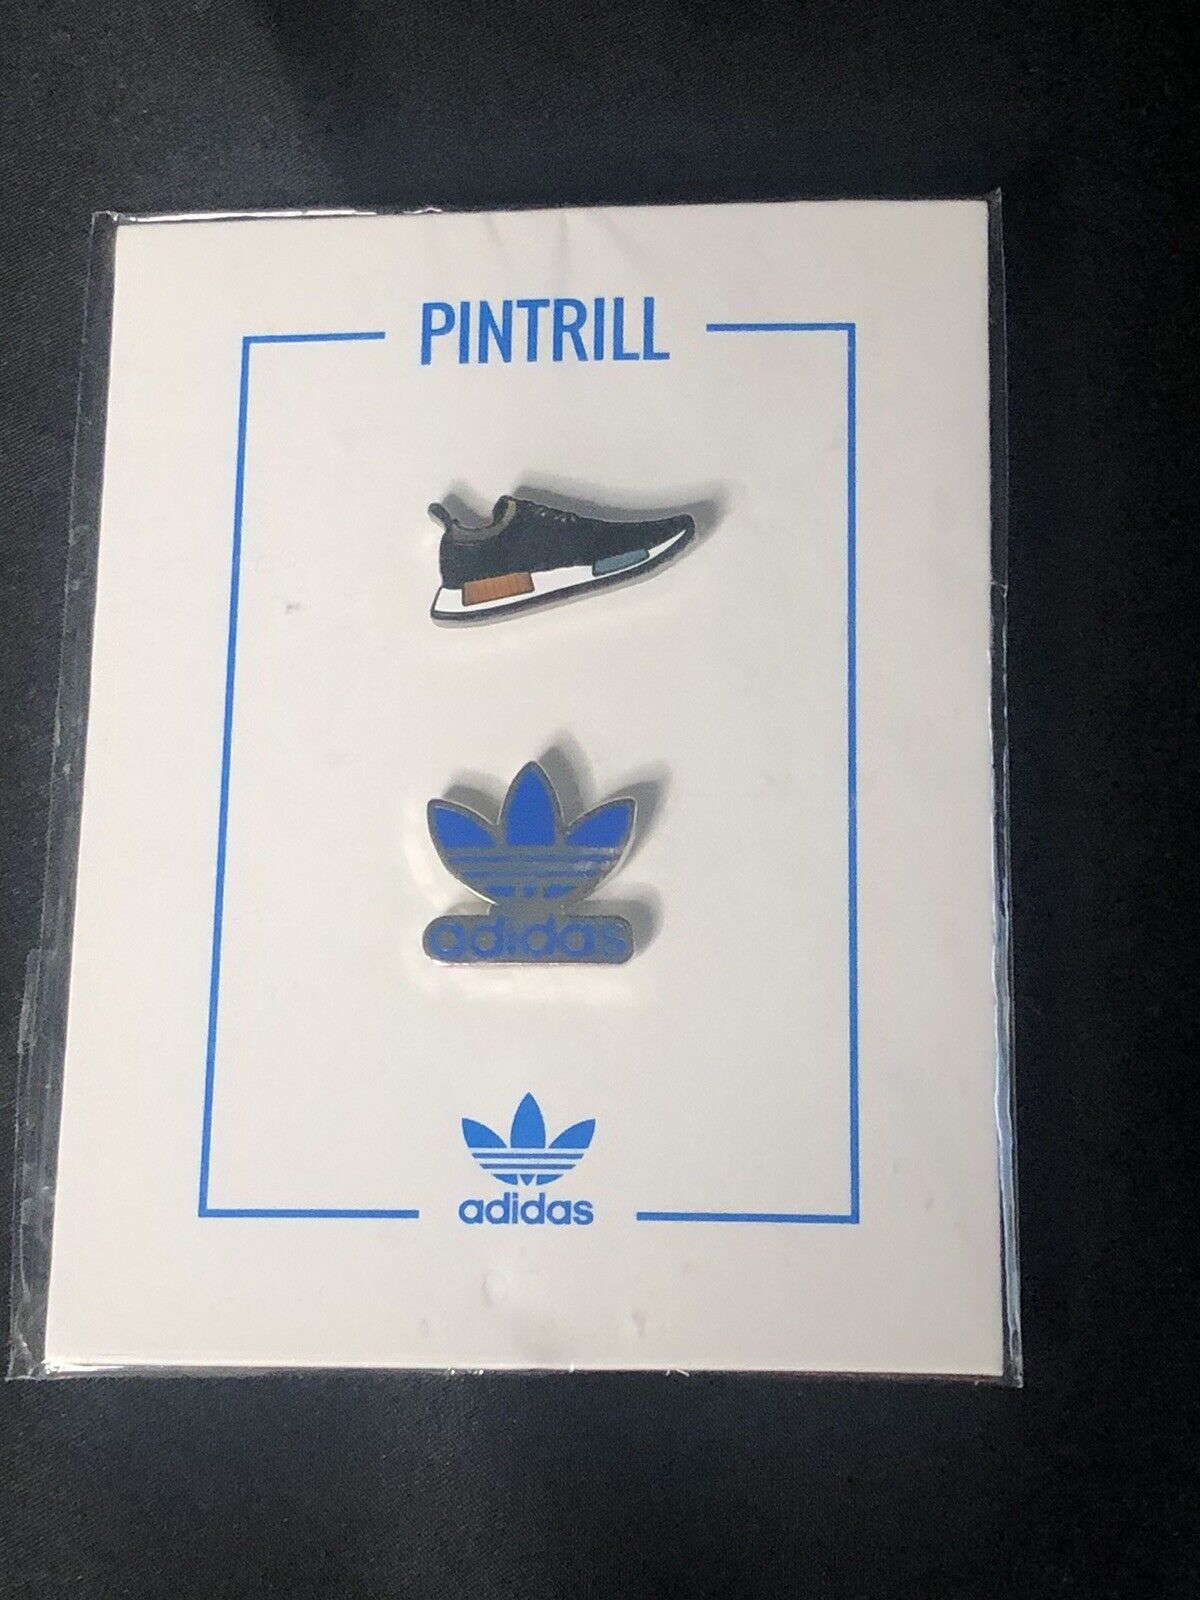 Pintrill x Adidas NMD and Trefoil Logo Pin Set Complexcon New